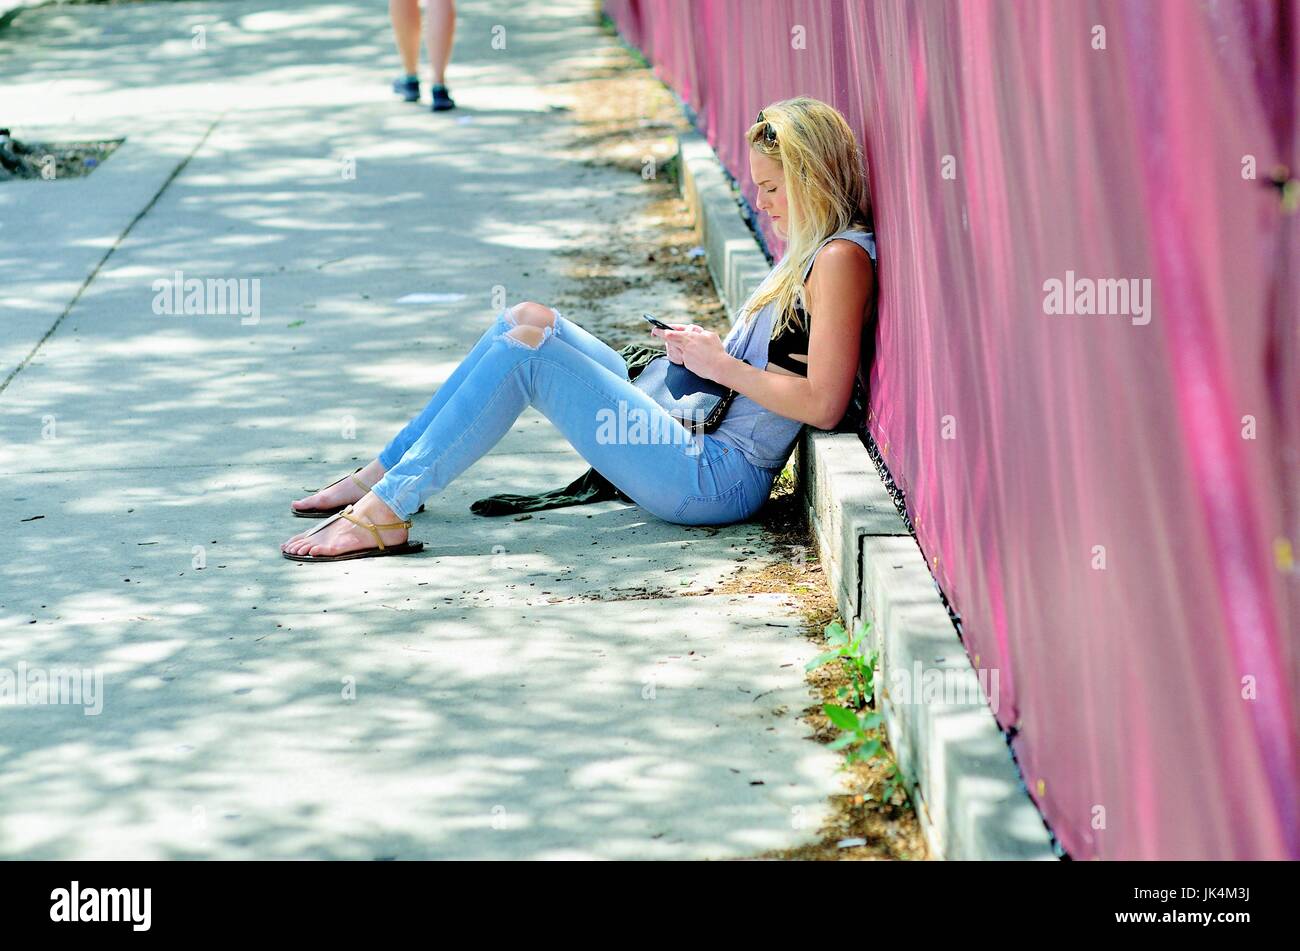 Chicago, Illinois, USA. Young woman seated on a sidewalk while checking her phone near DePaul University in Chicago. Stock Photo